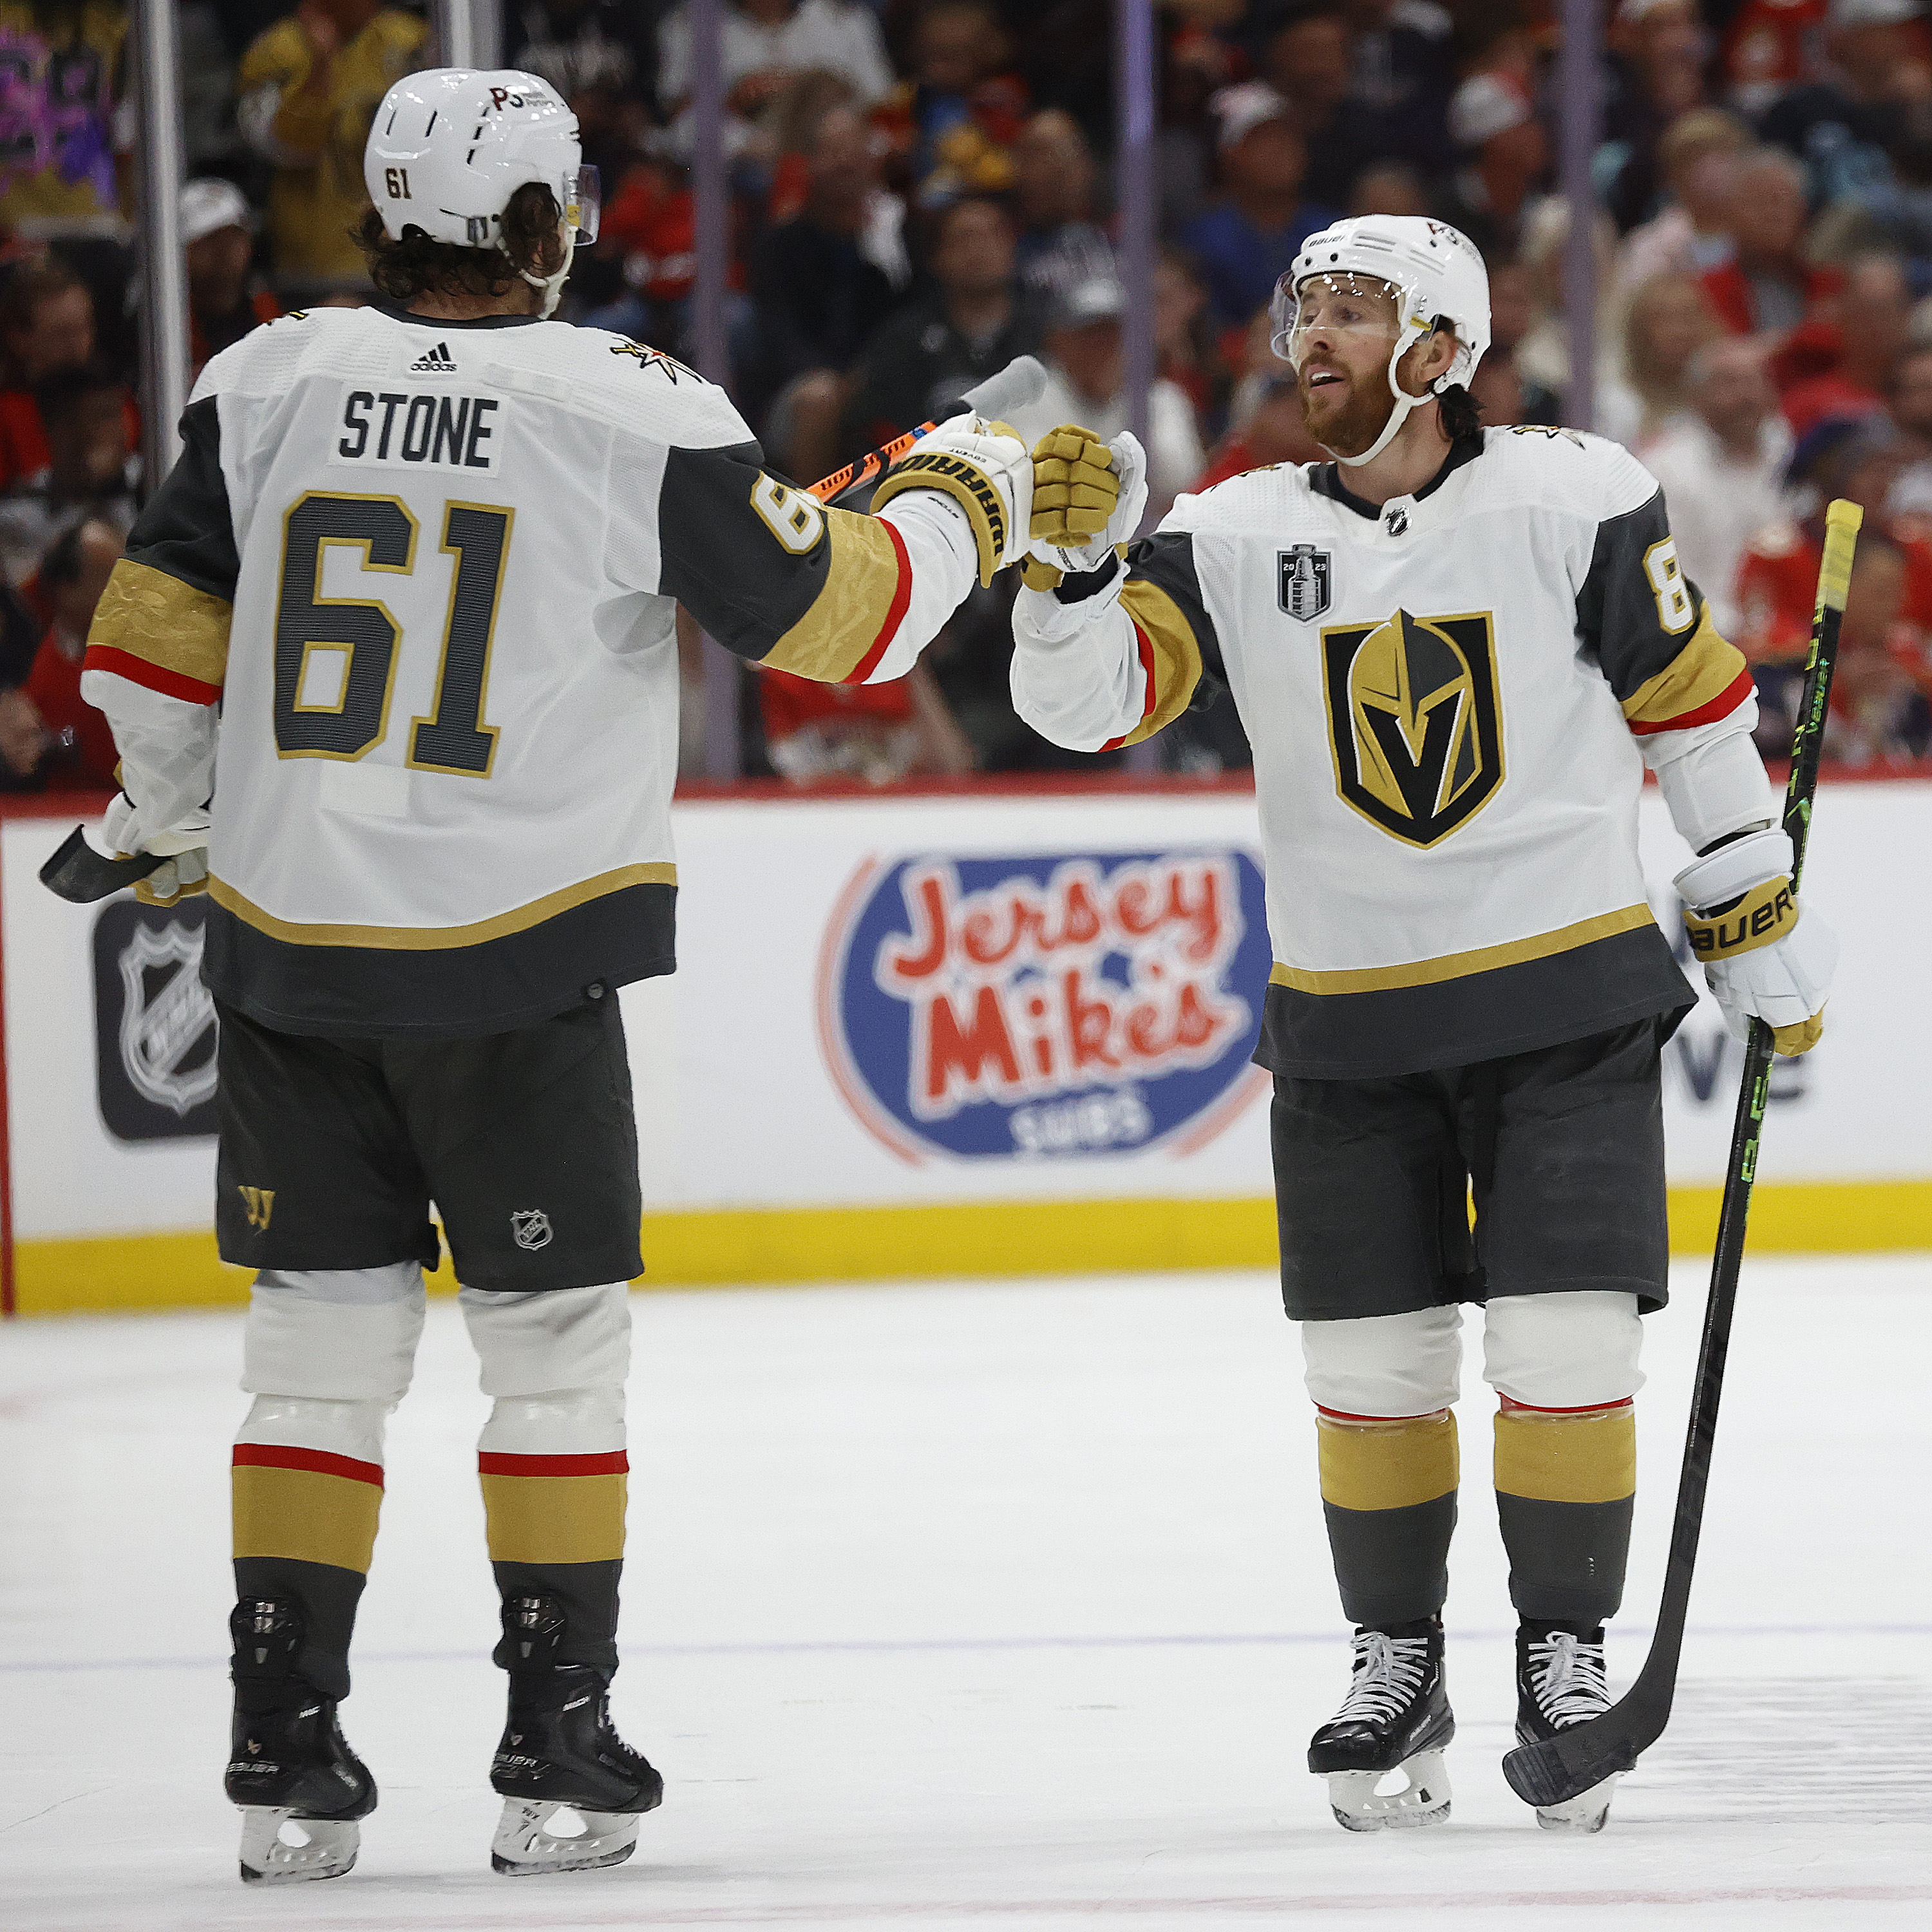 Jonathan Marchessault #81 of the Vegas Golden Knights celebrates his goal with teammate Mark Stone #61 during the second period against the Florida Panthers in Game Three of the 2023 Stanley Cup Final at the FLA Live Arena on June 8, 2023 in Sunrise, Florida.